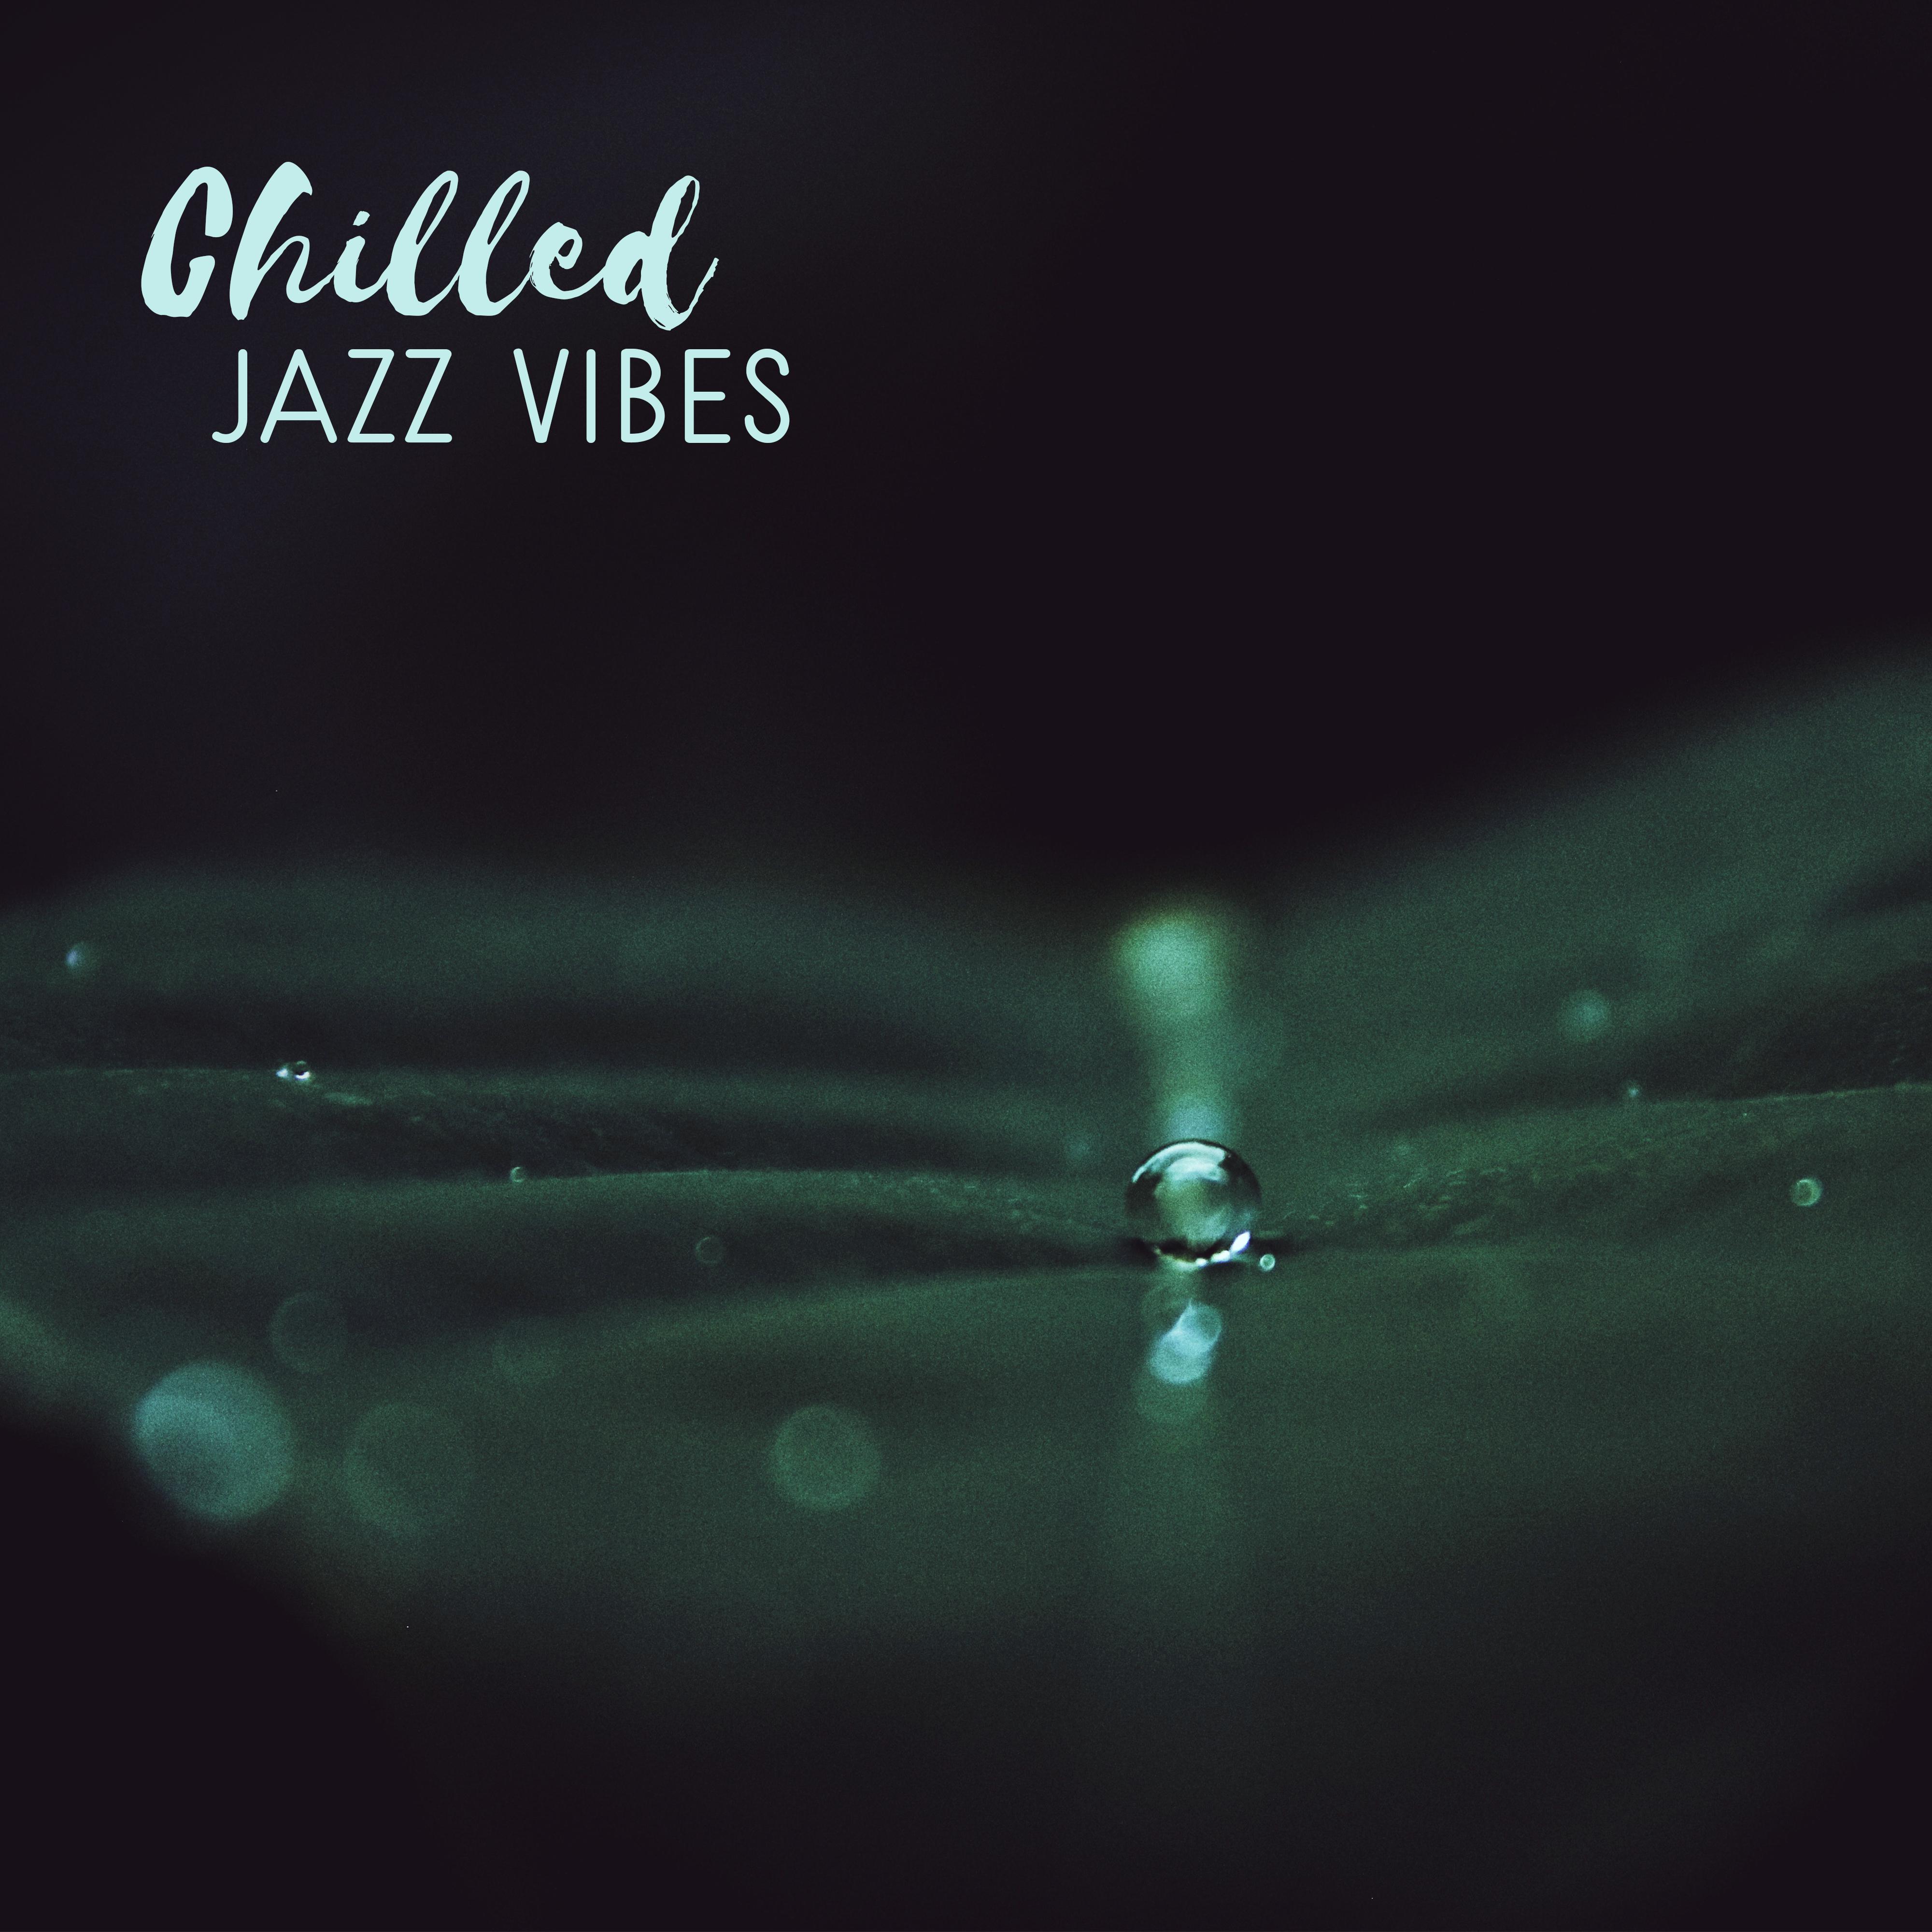 Chilled Jazz Vibes